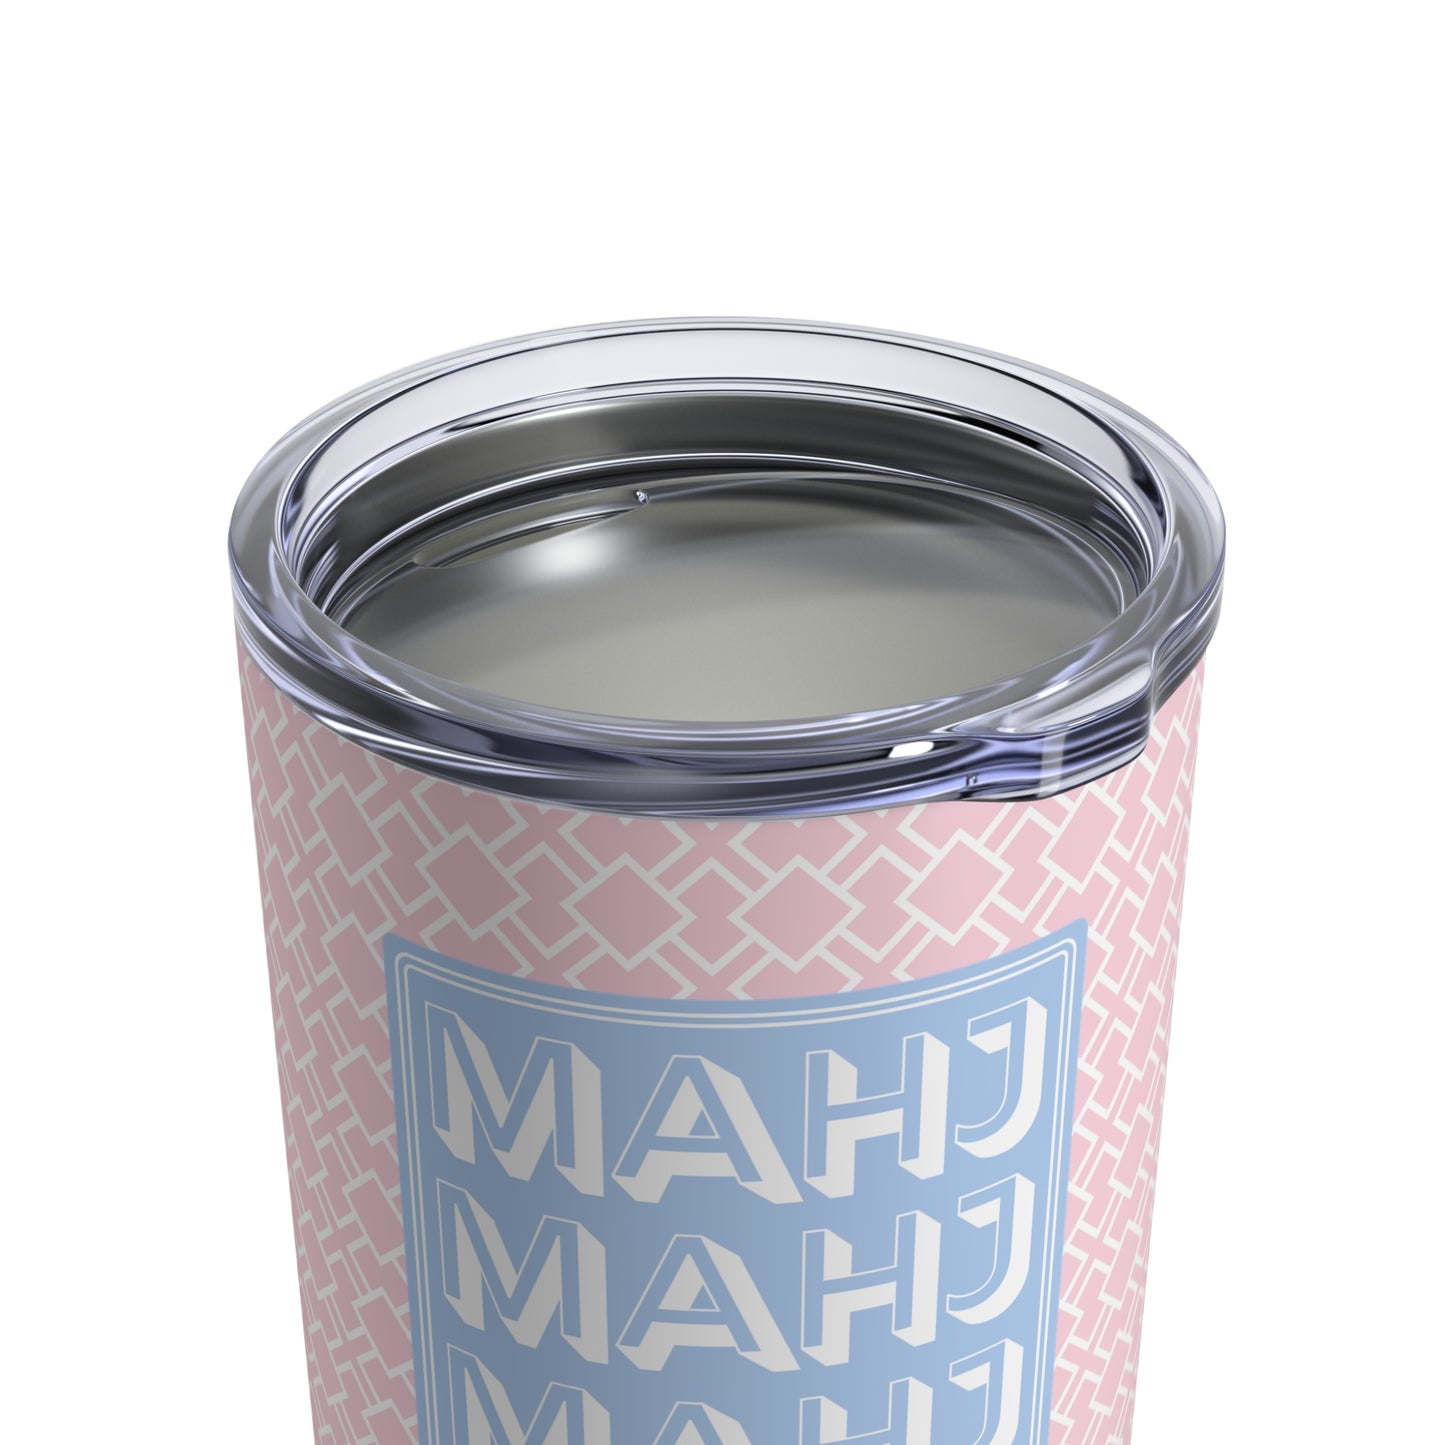 Personalized and Custom Colorful Mahjong Tumbler with Mahjongg tiles Great Gift for Mahj Game Party or Player- Unique Modern Design Pink Blue Green Orange Options for Mah Jongg Cups for Drinks and Cocktails